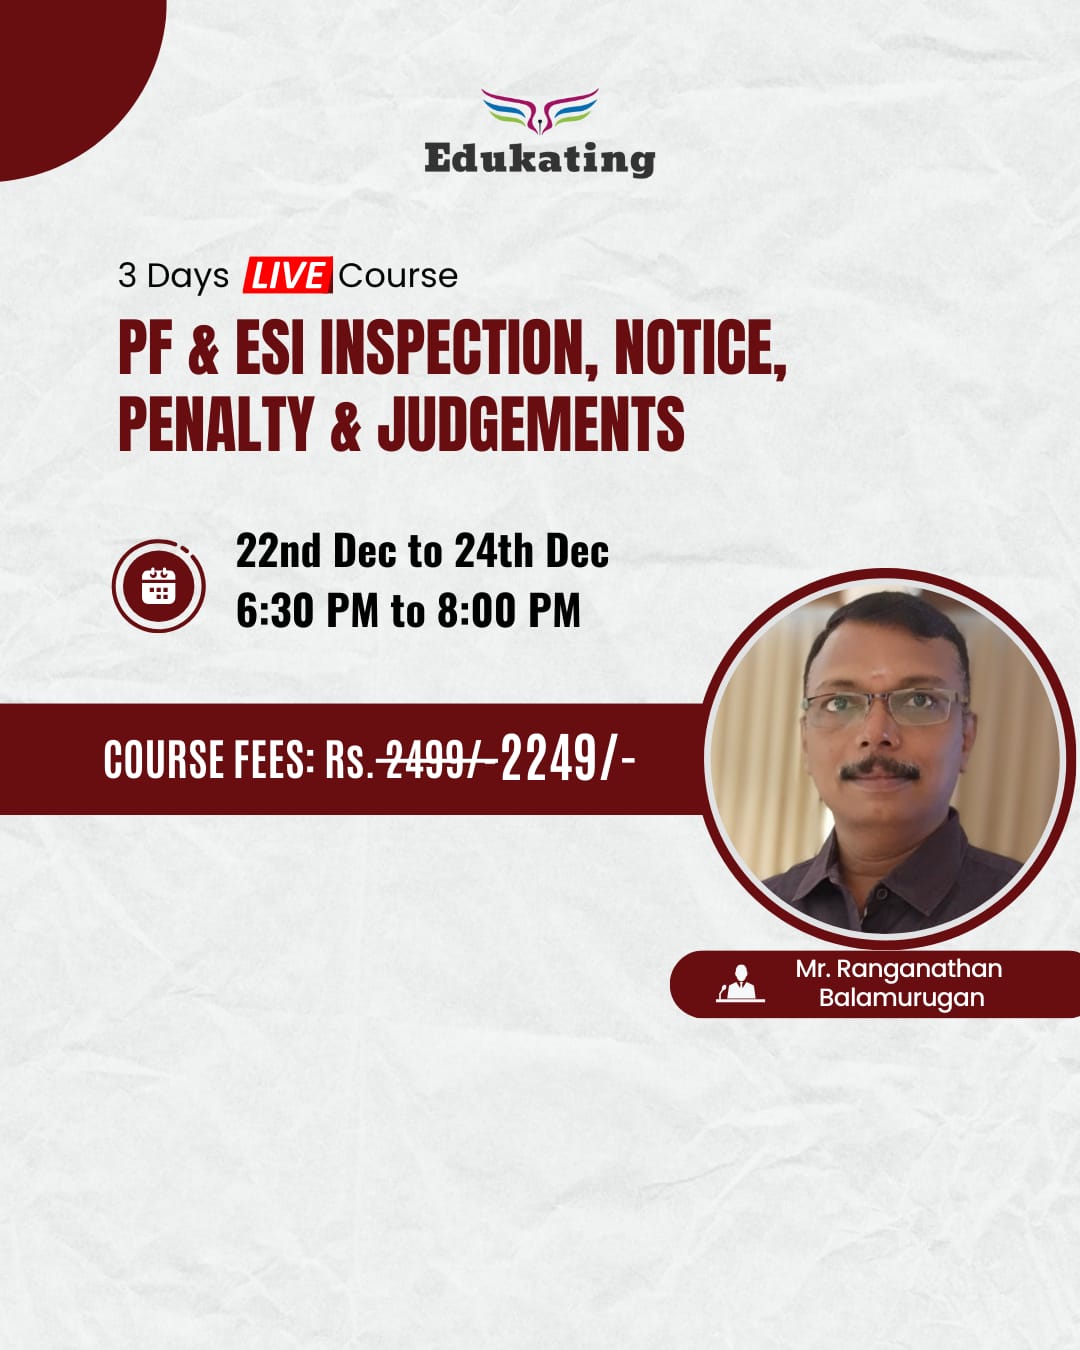 PF & ESI Inspection, Notice, Penalty & Judgements